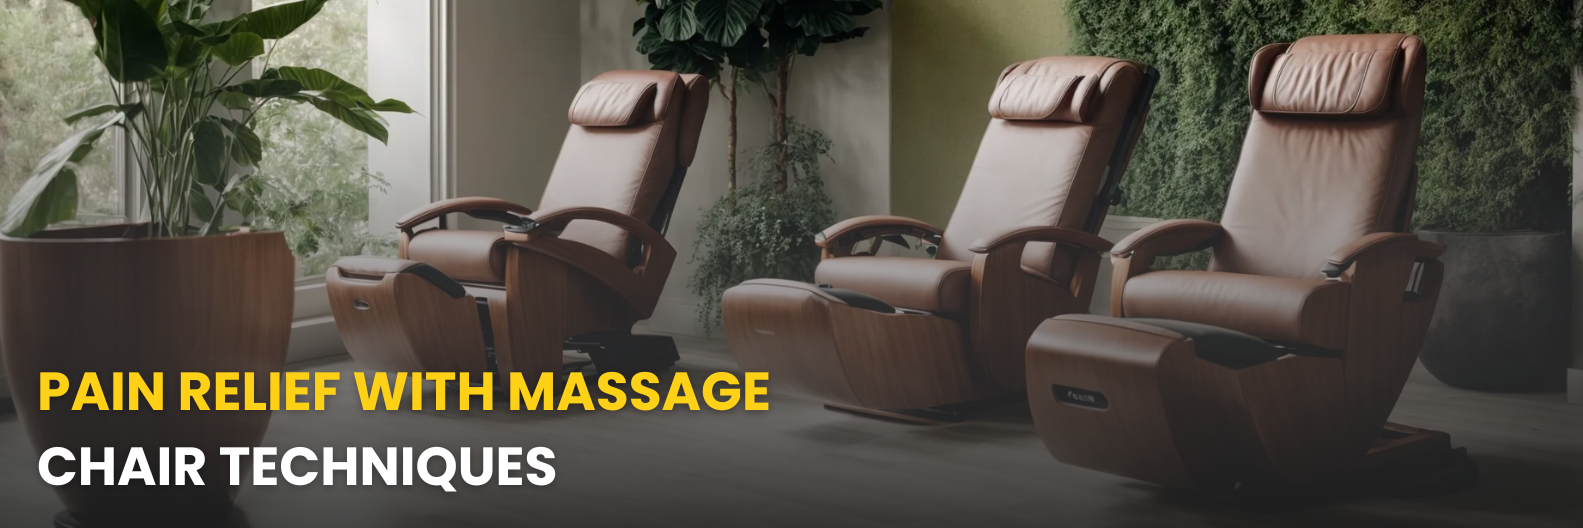 Discovering comfort: Massage chair techniques offer effective pain relief and relaxation in a soothing, innovative way